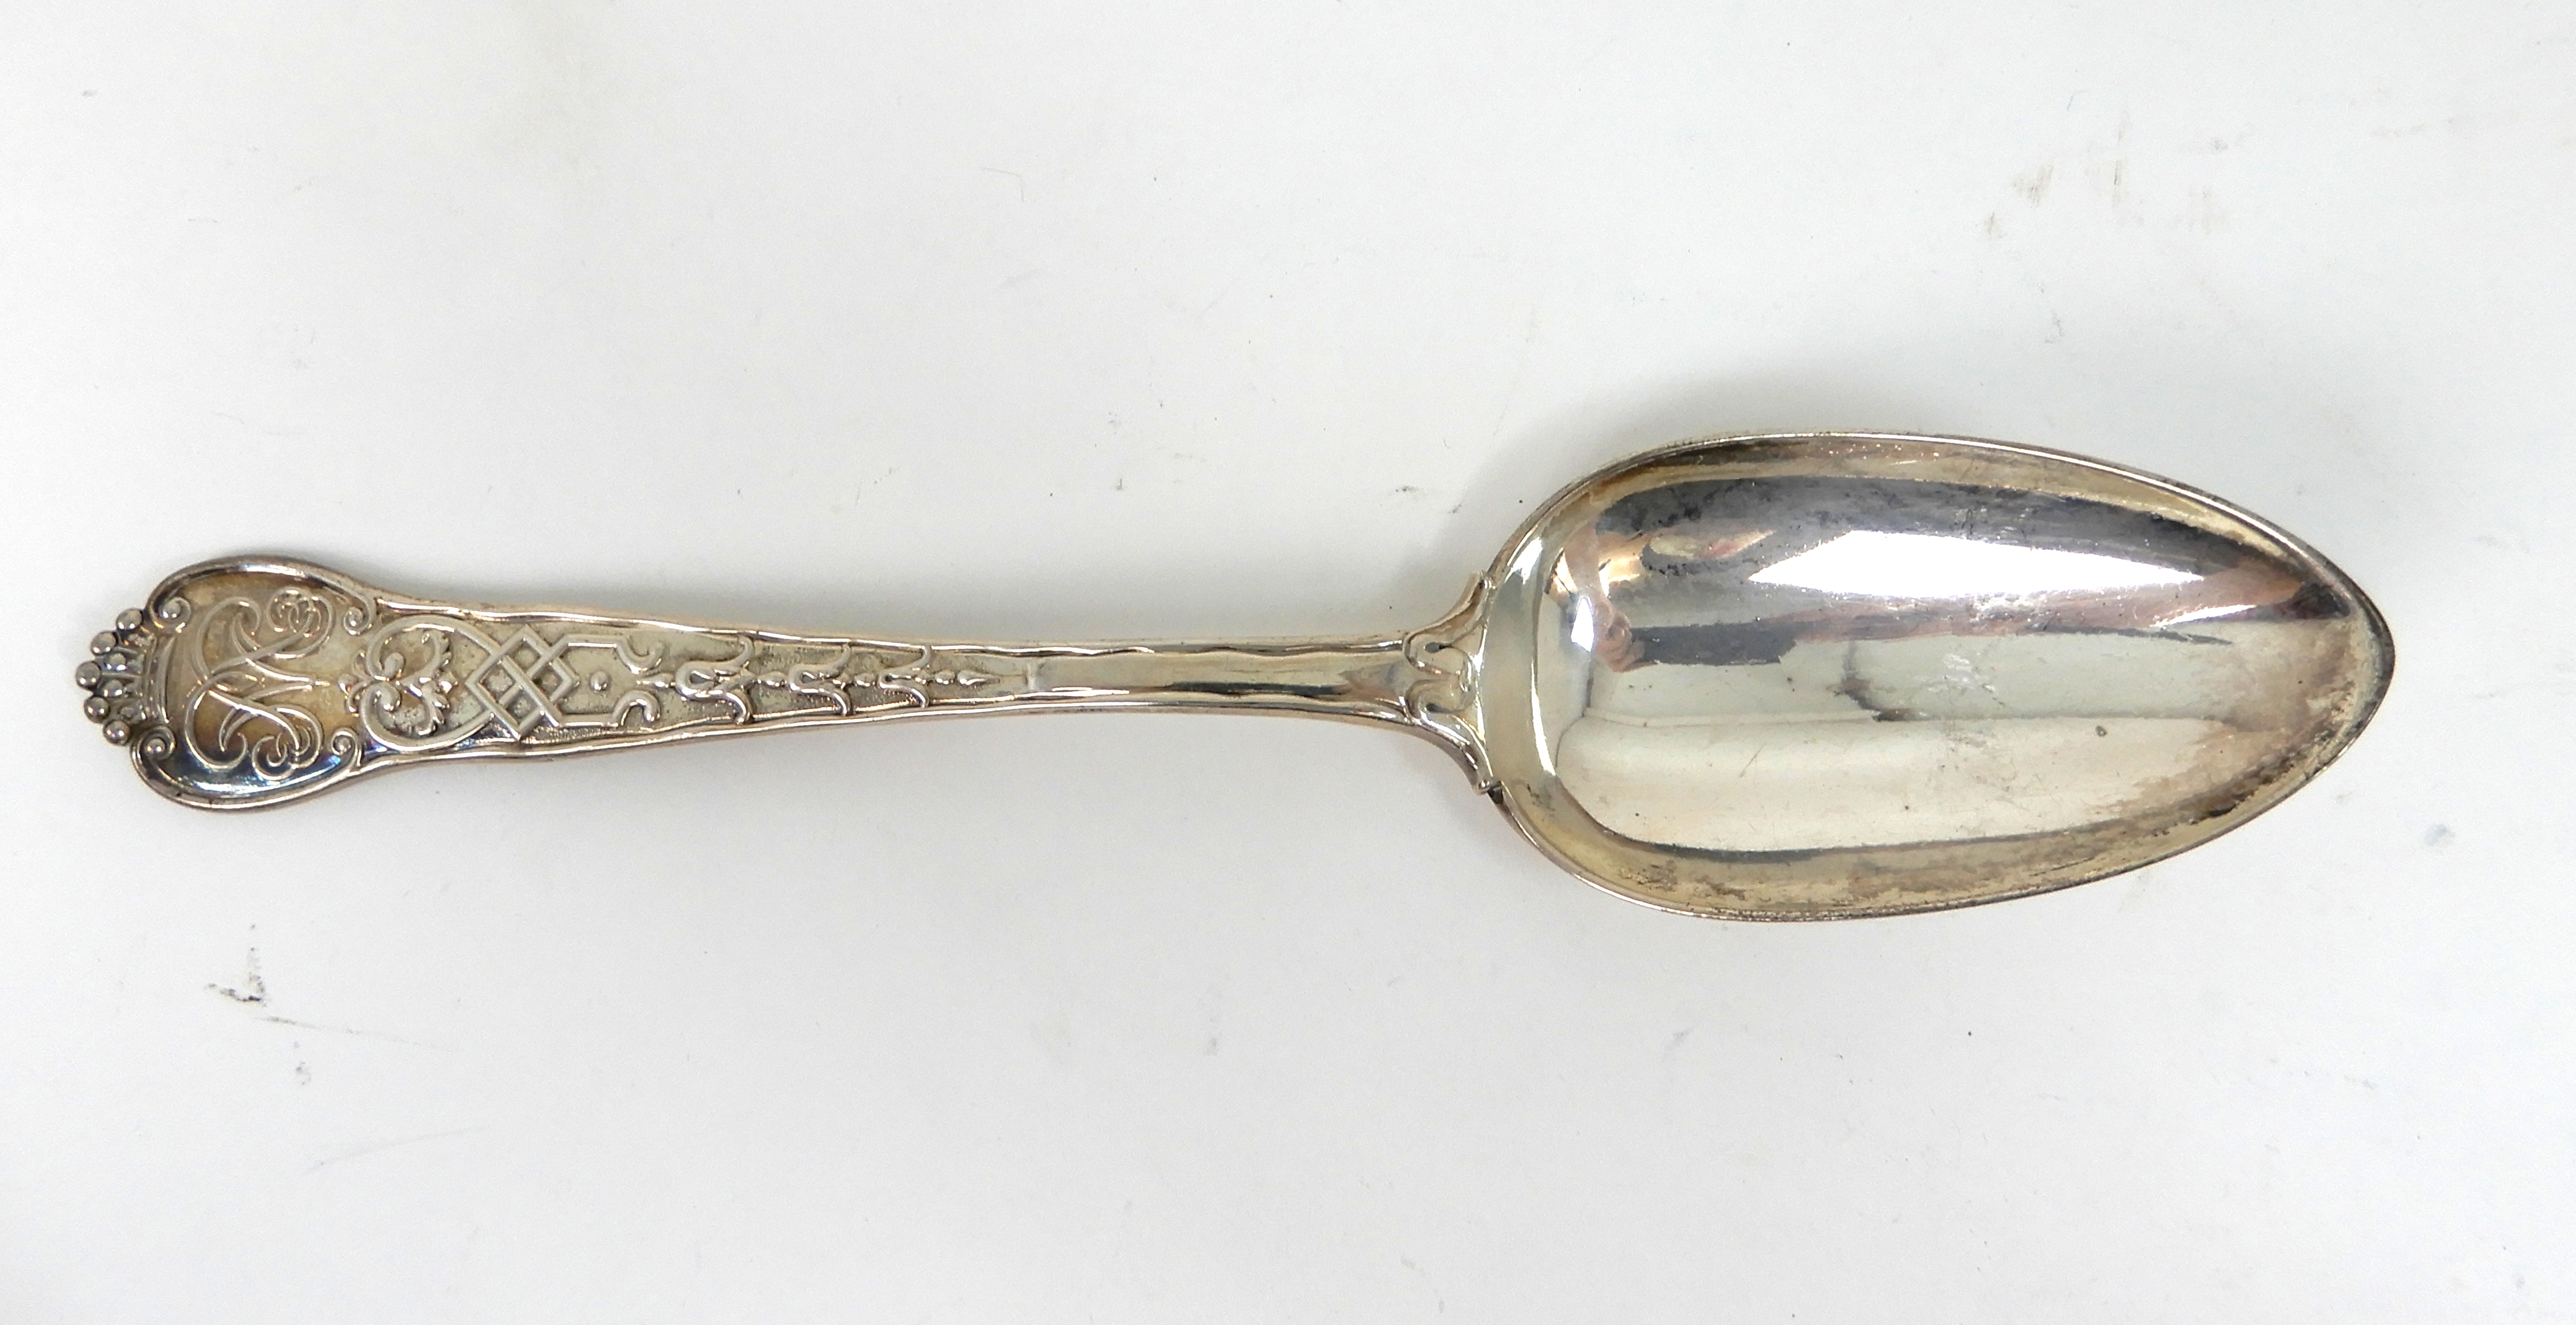 A SET OF SIX SILVER TABLESPOONS by William Theobold, London 1834, with ornately decorated stems, - Image 6 of 6